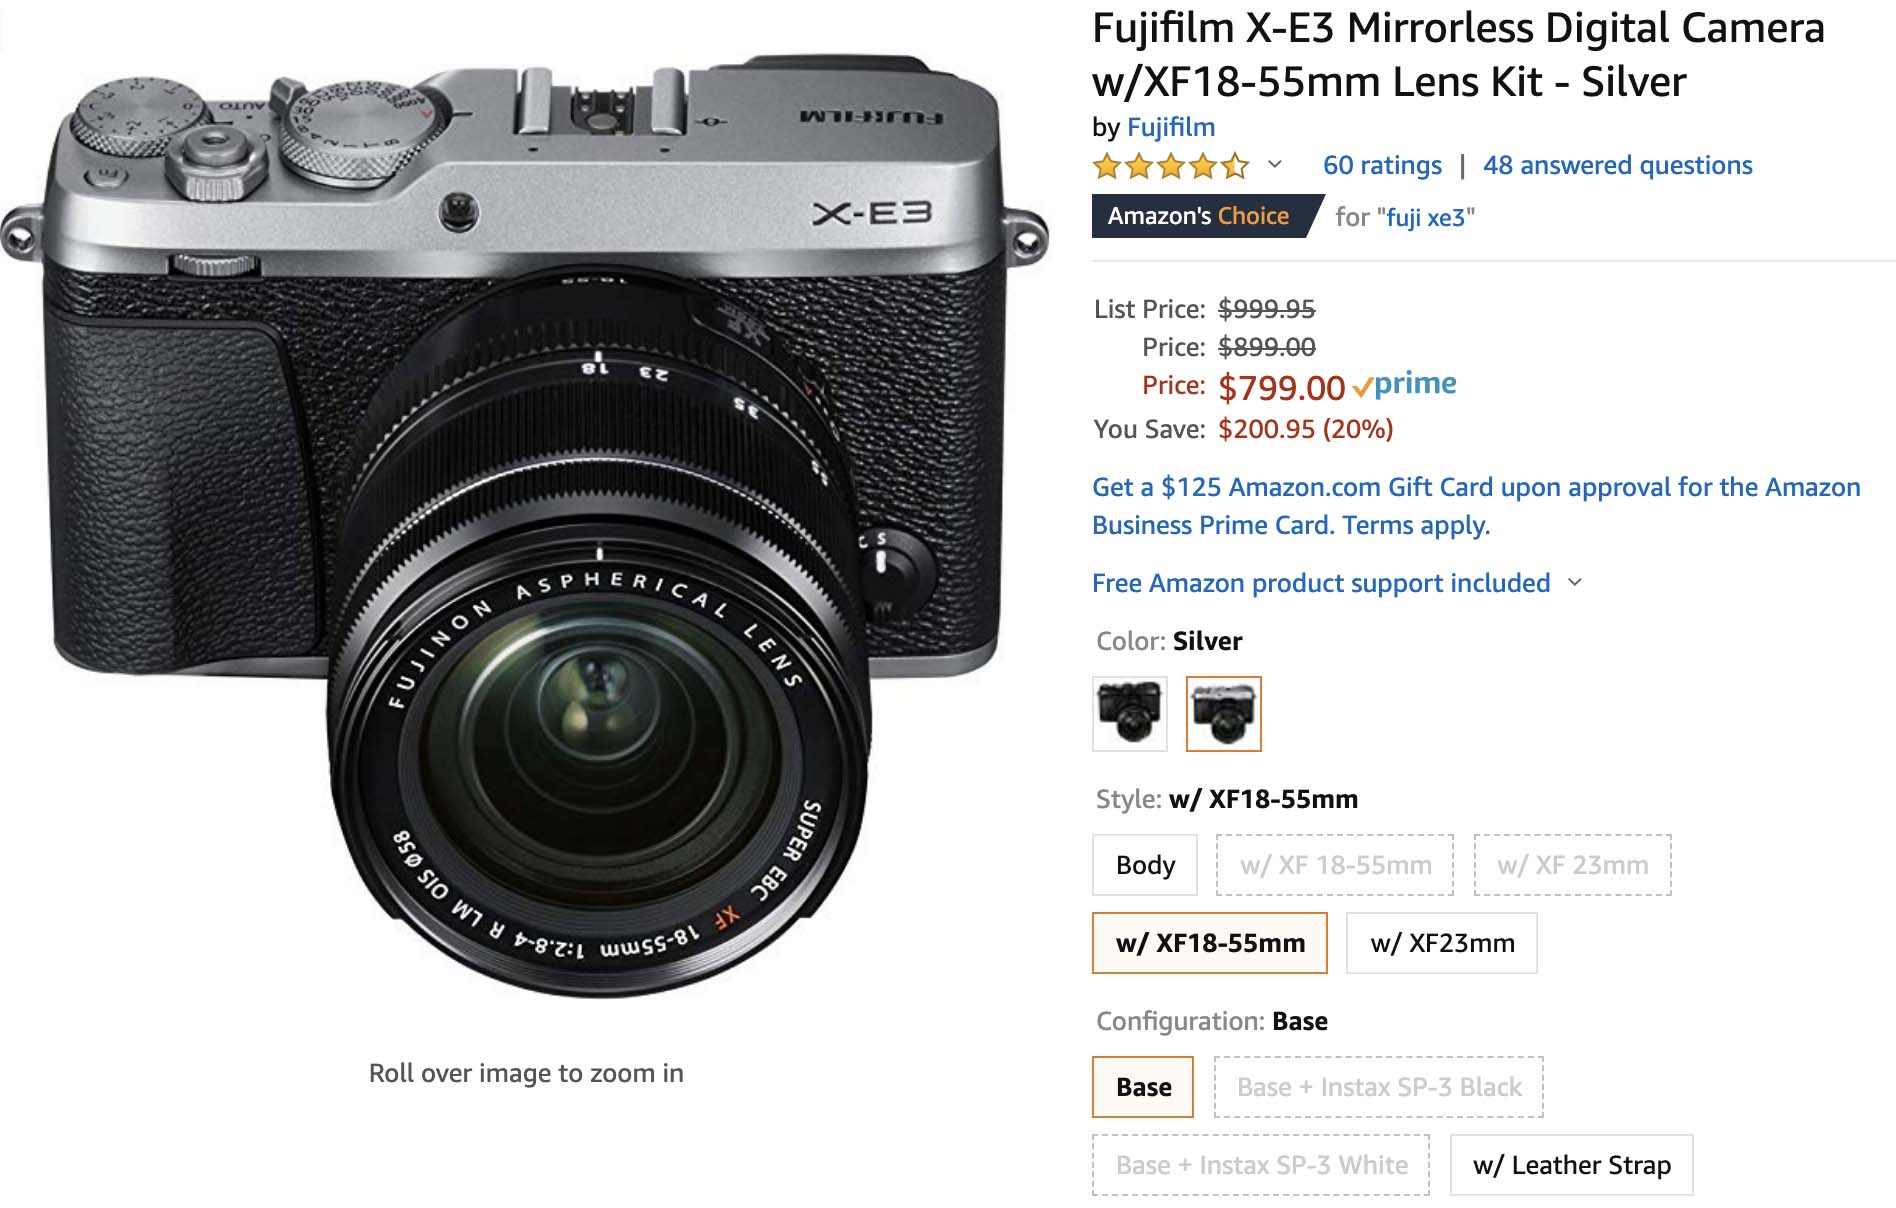 Fujifilm X-E3 Now $799 With Kit Lens and $599 For The Body - Addict